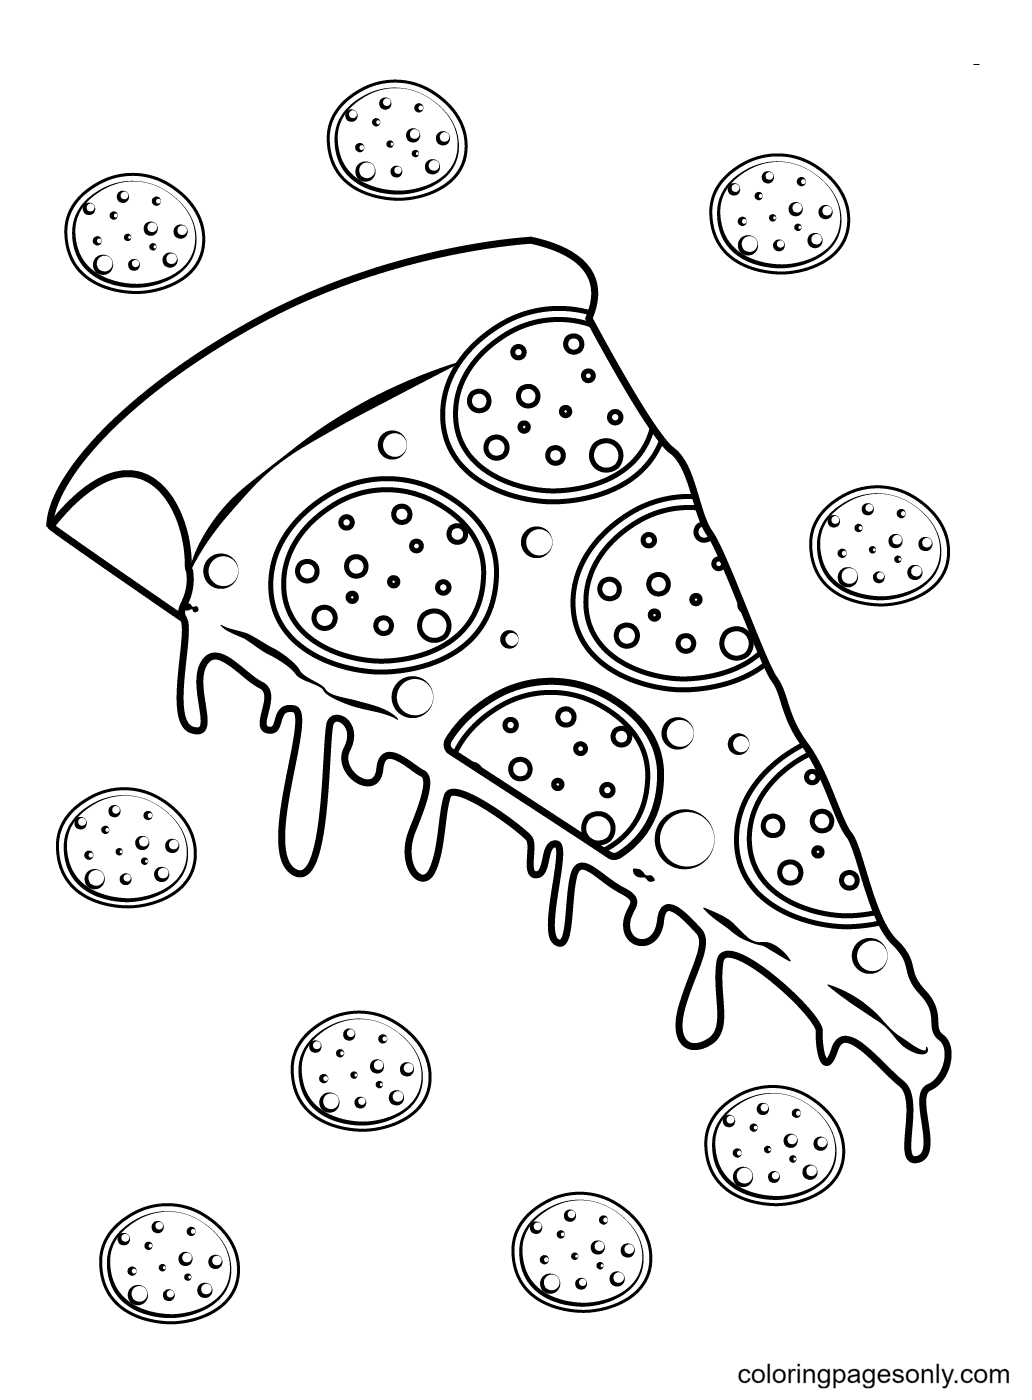 Pizza with pepperoni toppings and oozing melted cheese Coloring Page